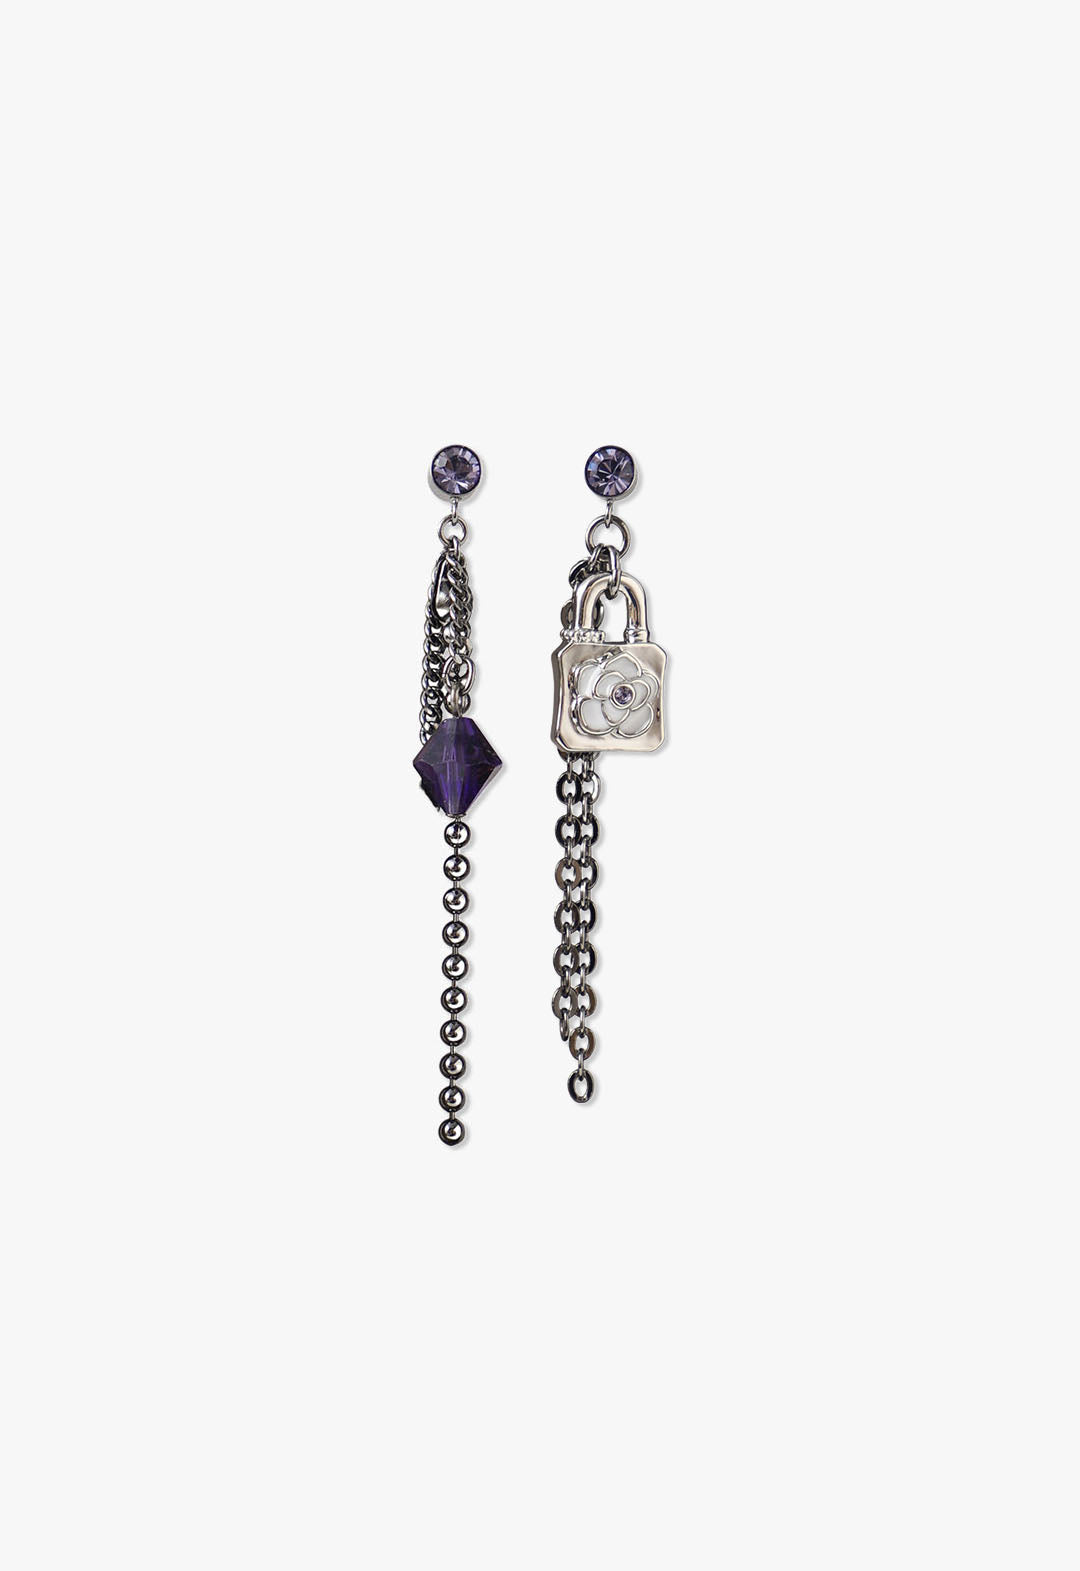 Mismatch Rose Lock Chain Earring Silver, 3-chained with a dark blue stone